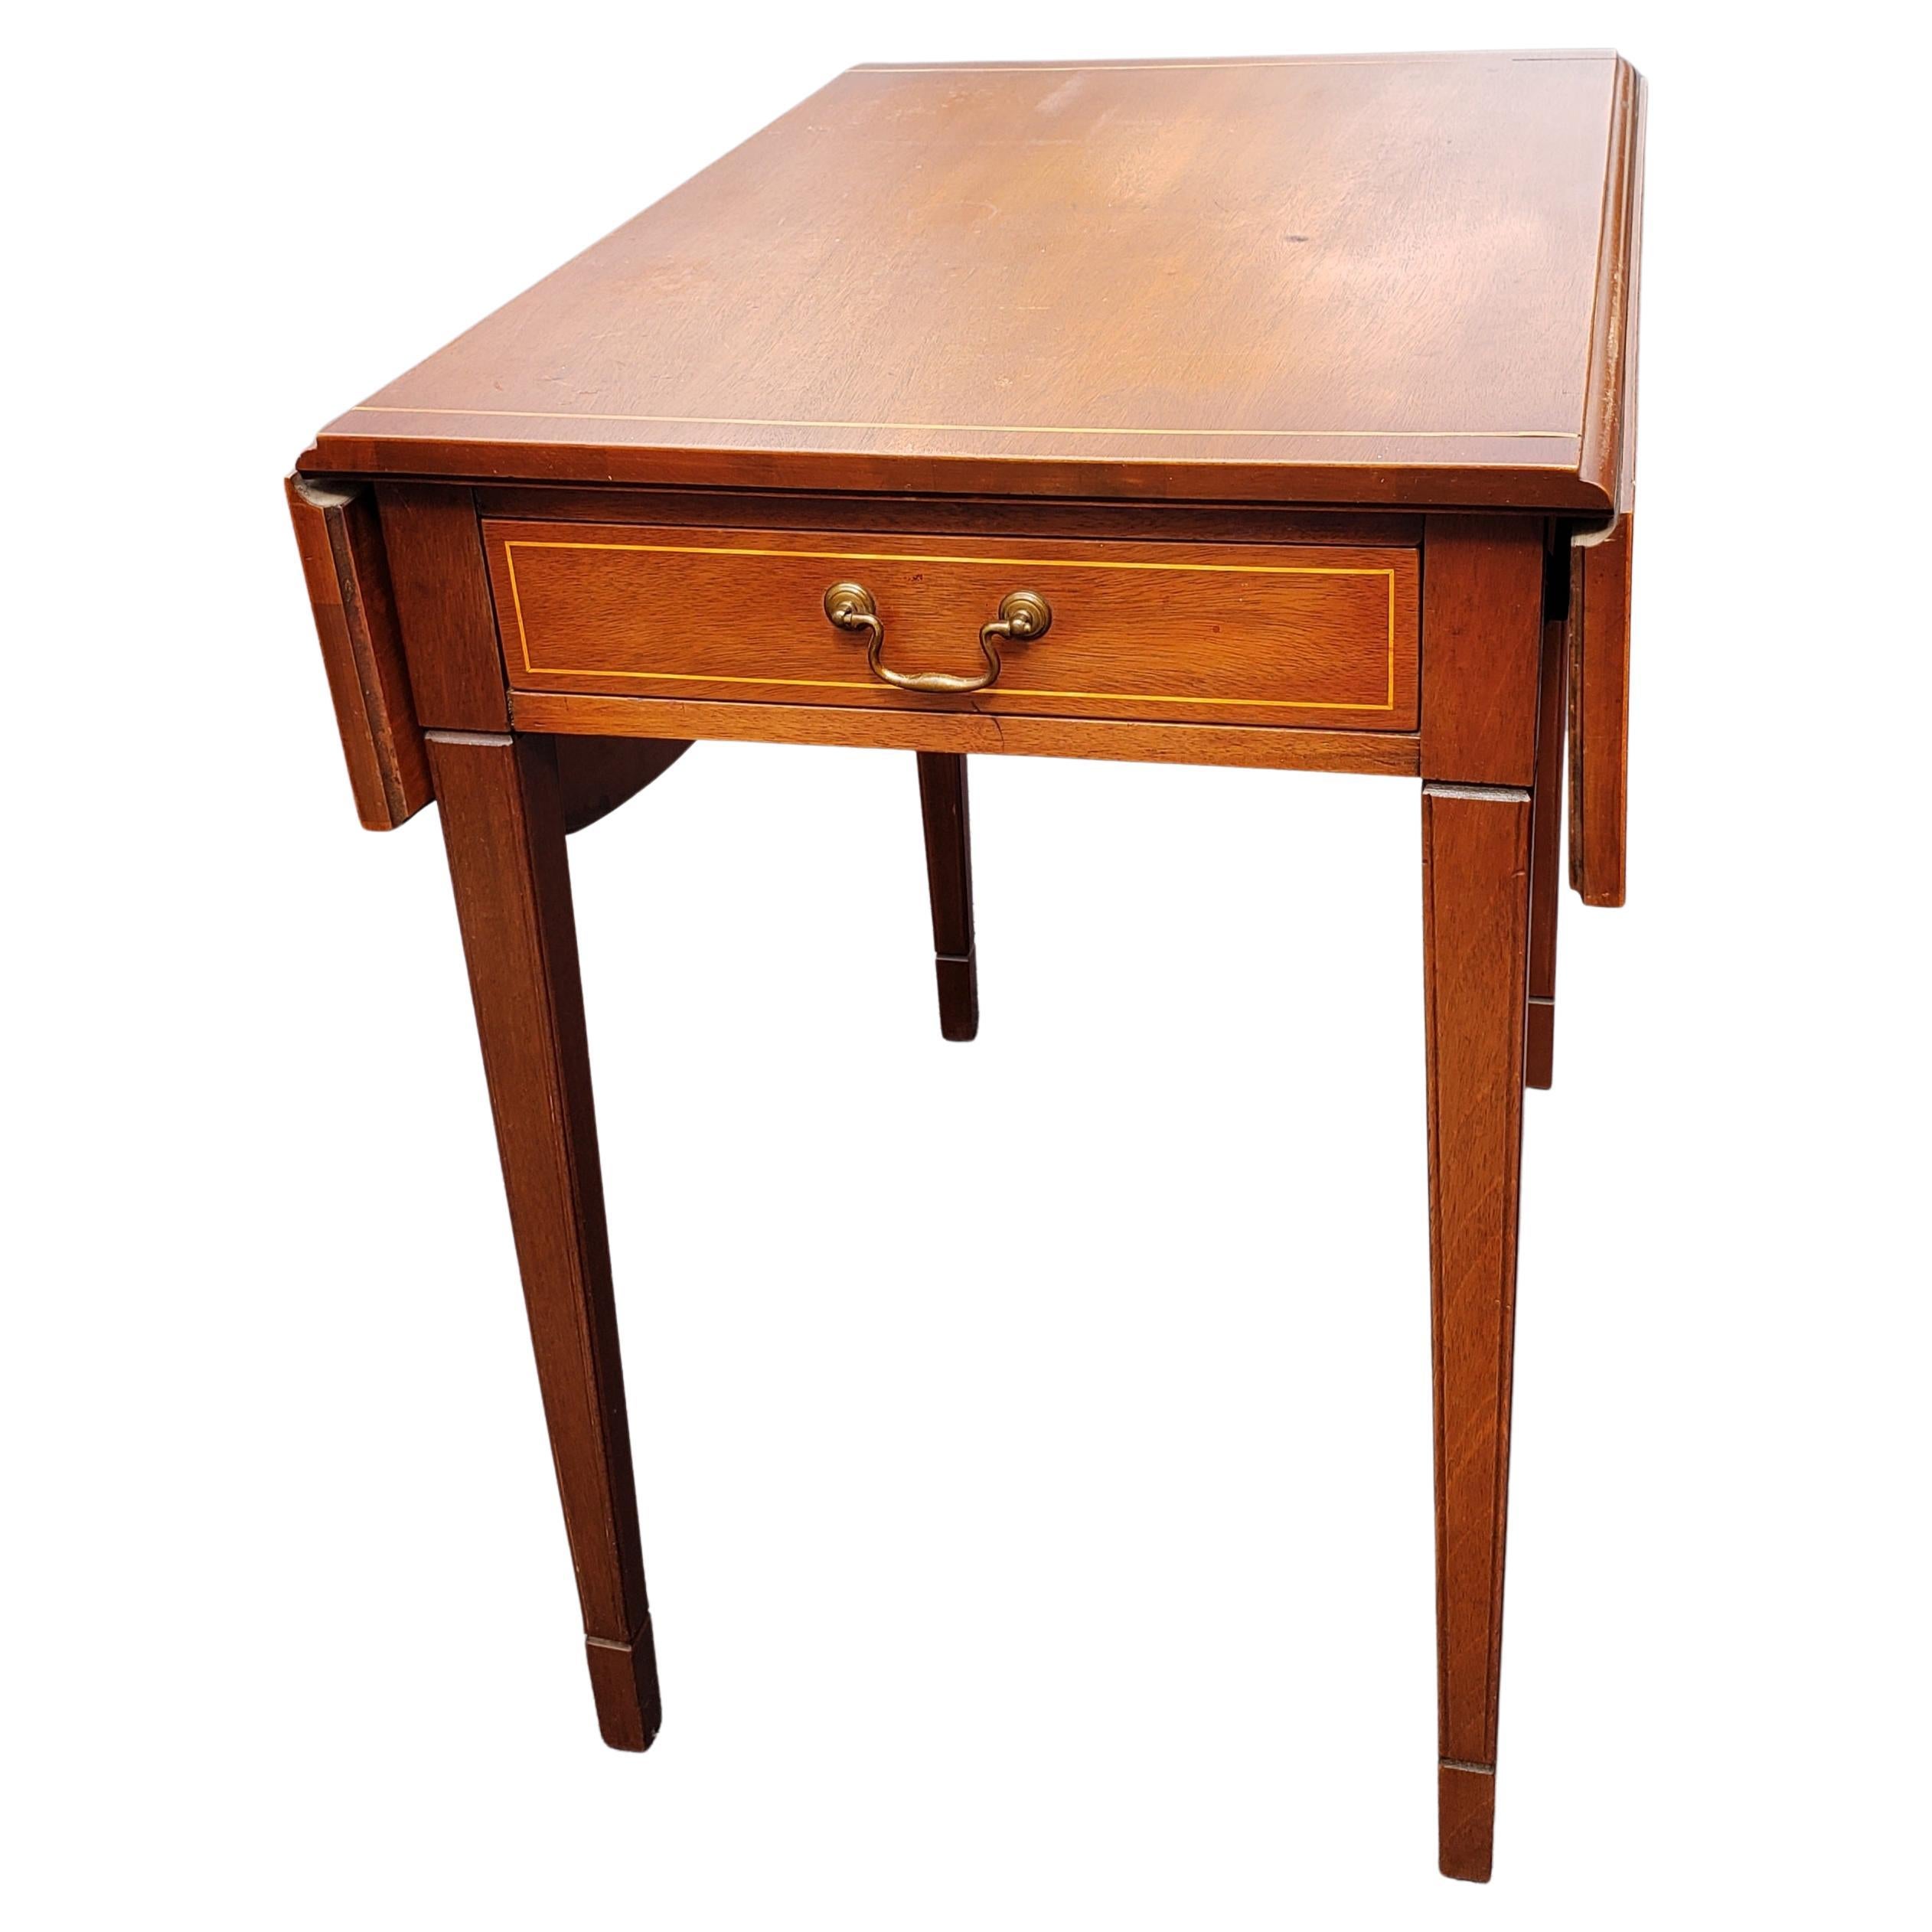 American Brandt Certified Genuine Mahogany Pembroke Drop-Leaf Tables, a Pair, circa 1940s For Sale